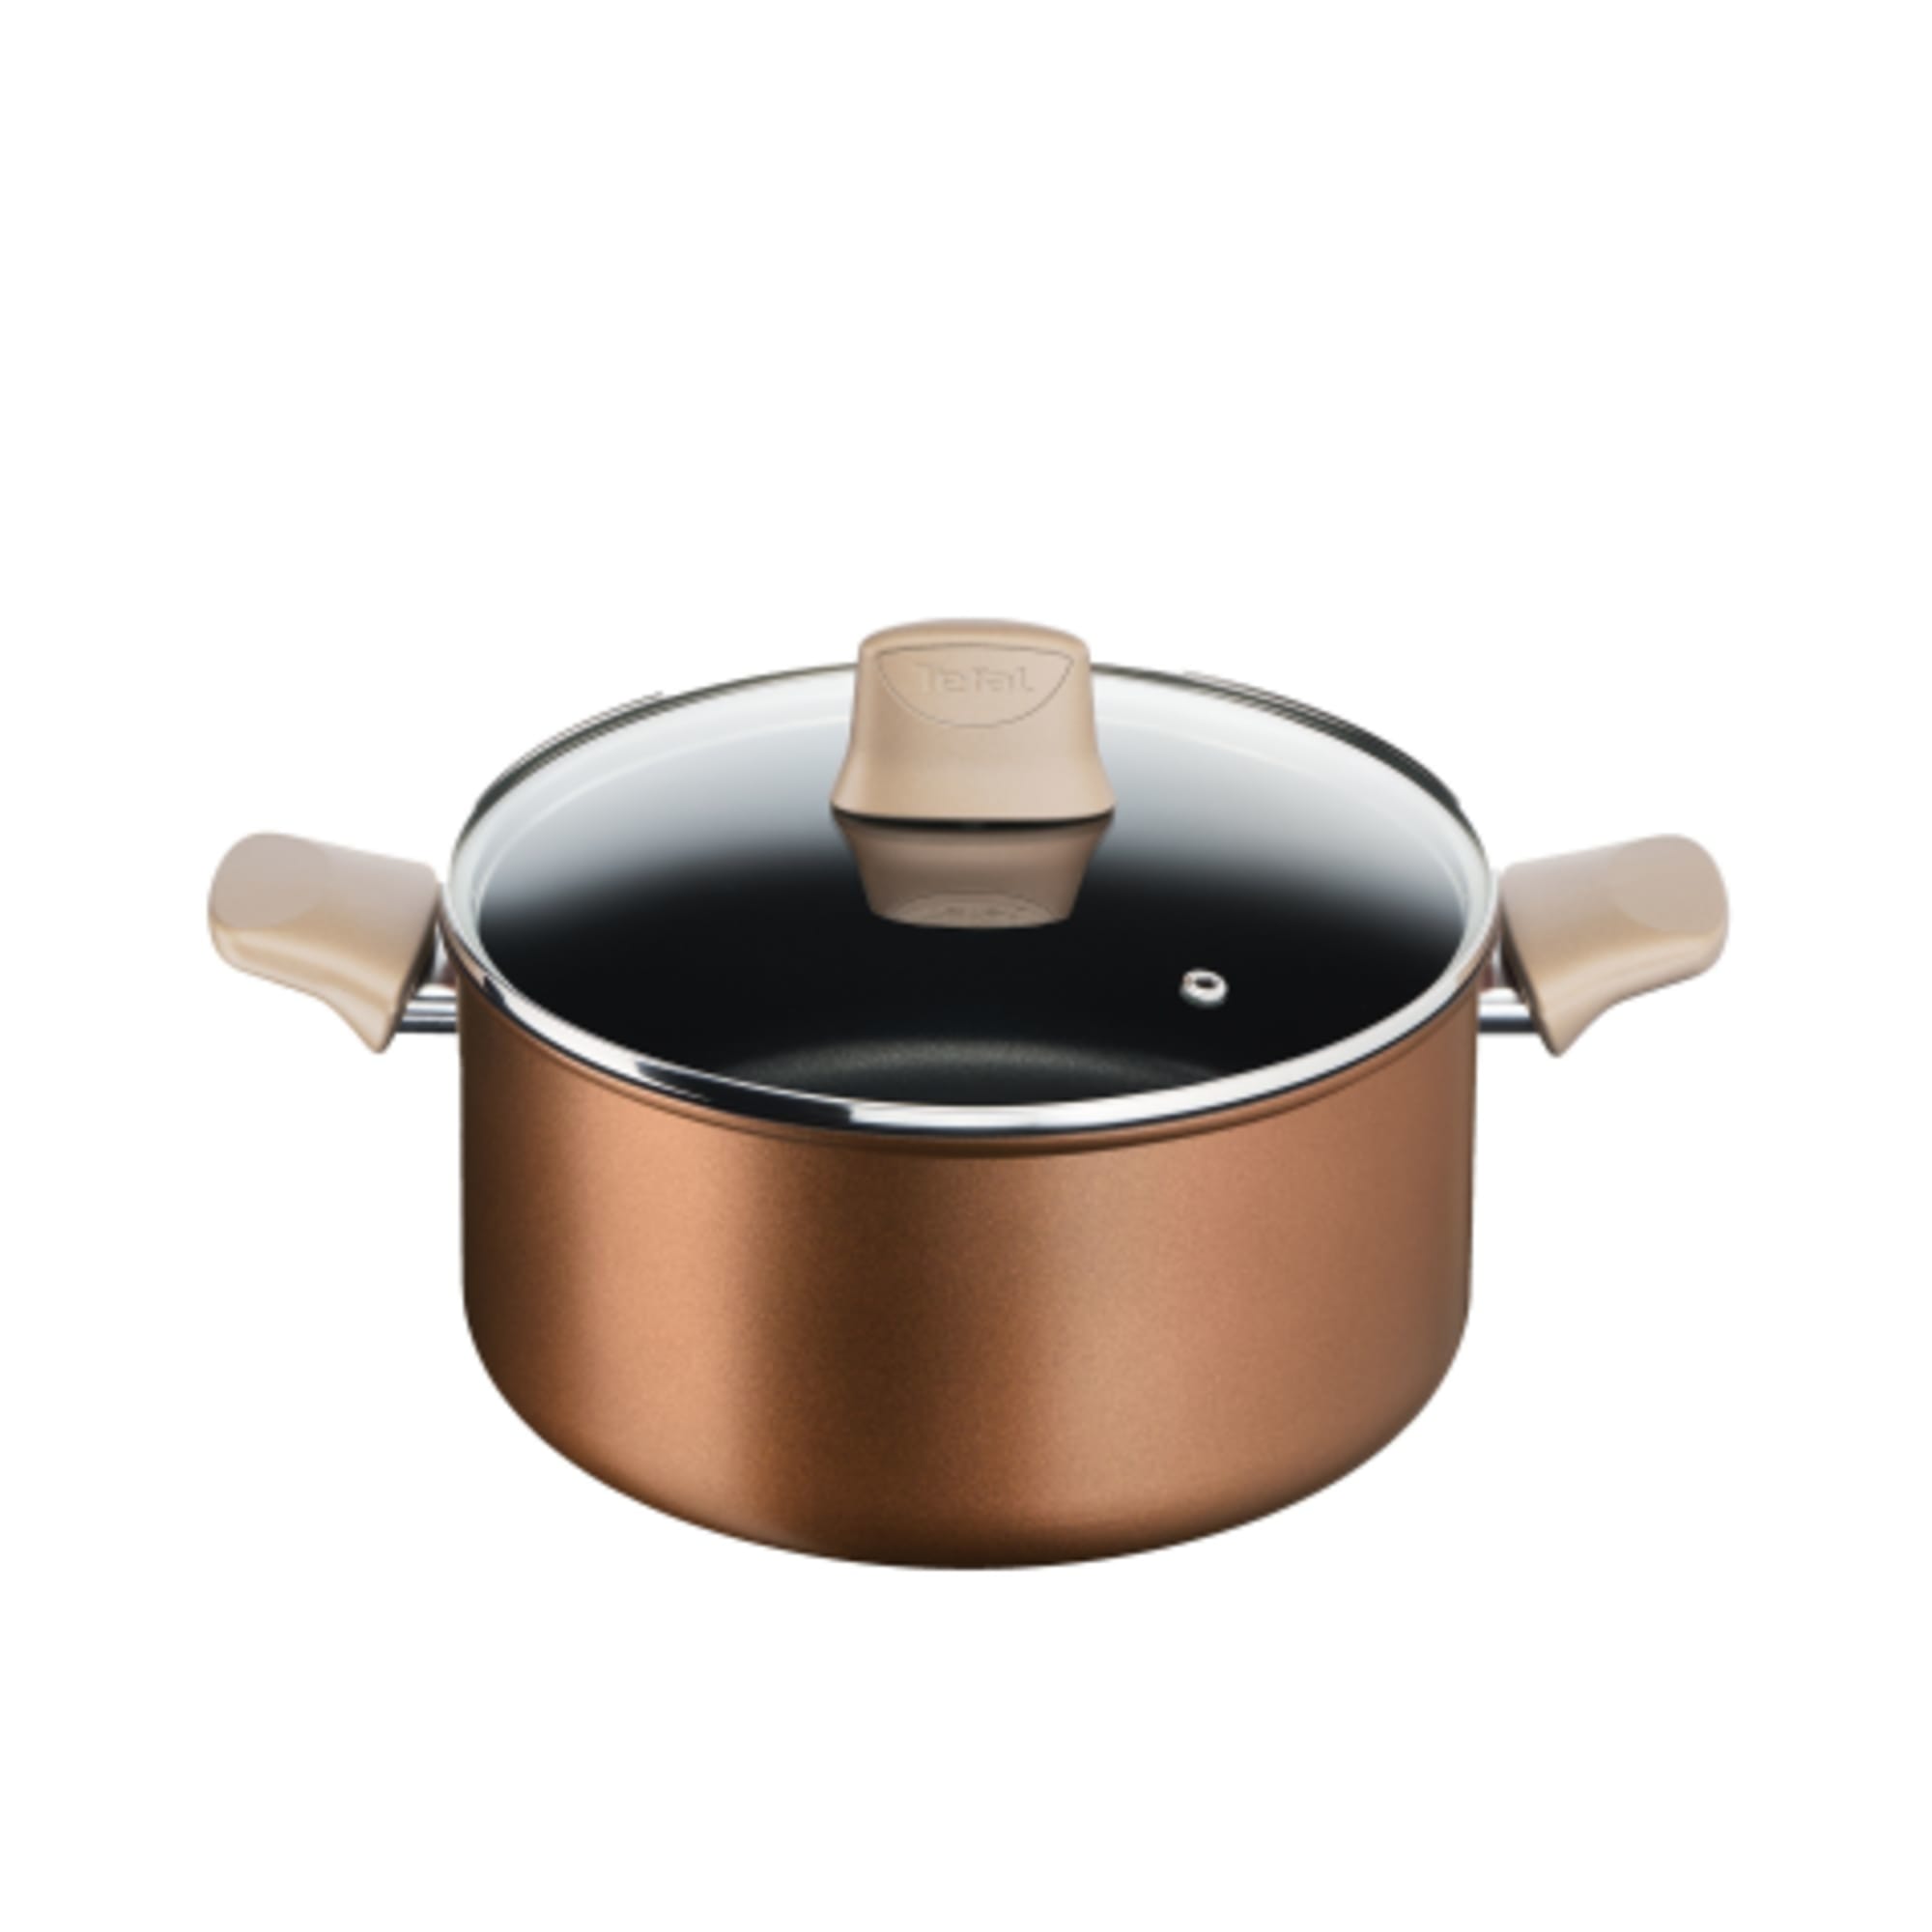 https://res.cloudinary.com/kitchenwarehouse/image/upload/c_fill,g_face,w_475/f_auto/t_PDP_2000x2000/Supplier%20Images%20/2000px/Tefal-Eco-Respect-Induction-Non-Stick-Stewpot-24cm-5L_1_2000px.jpg